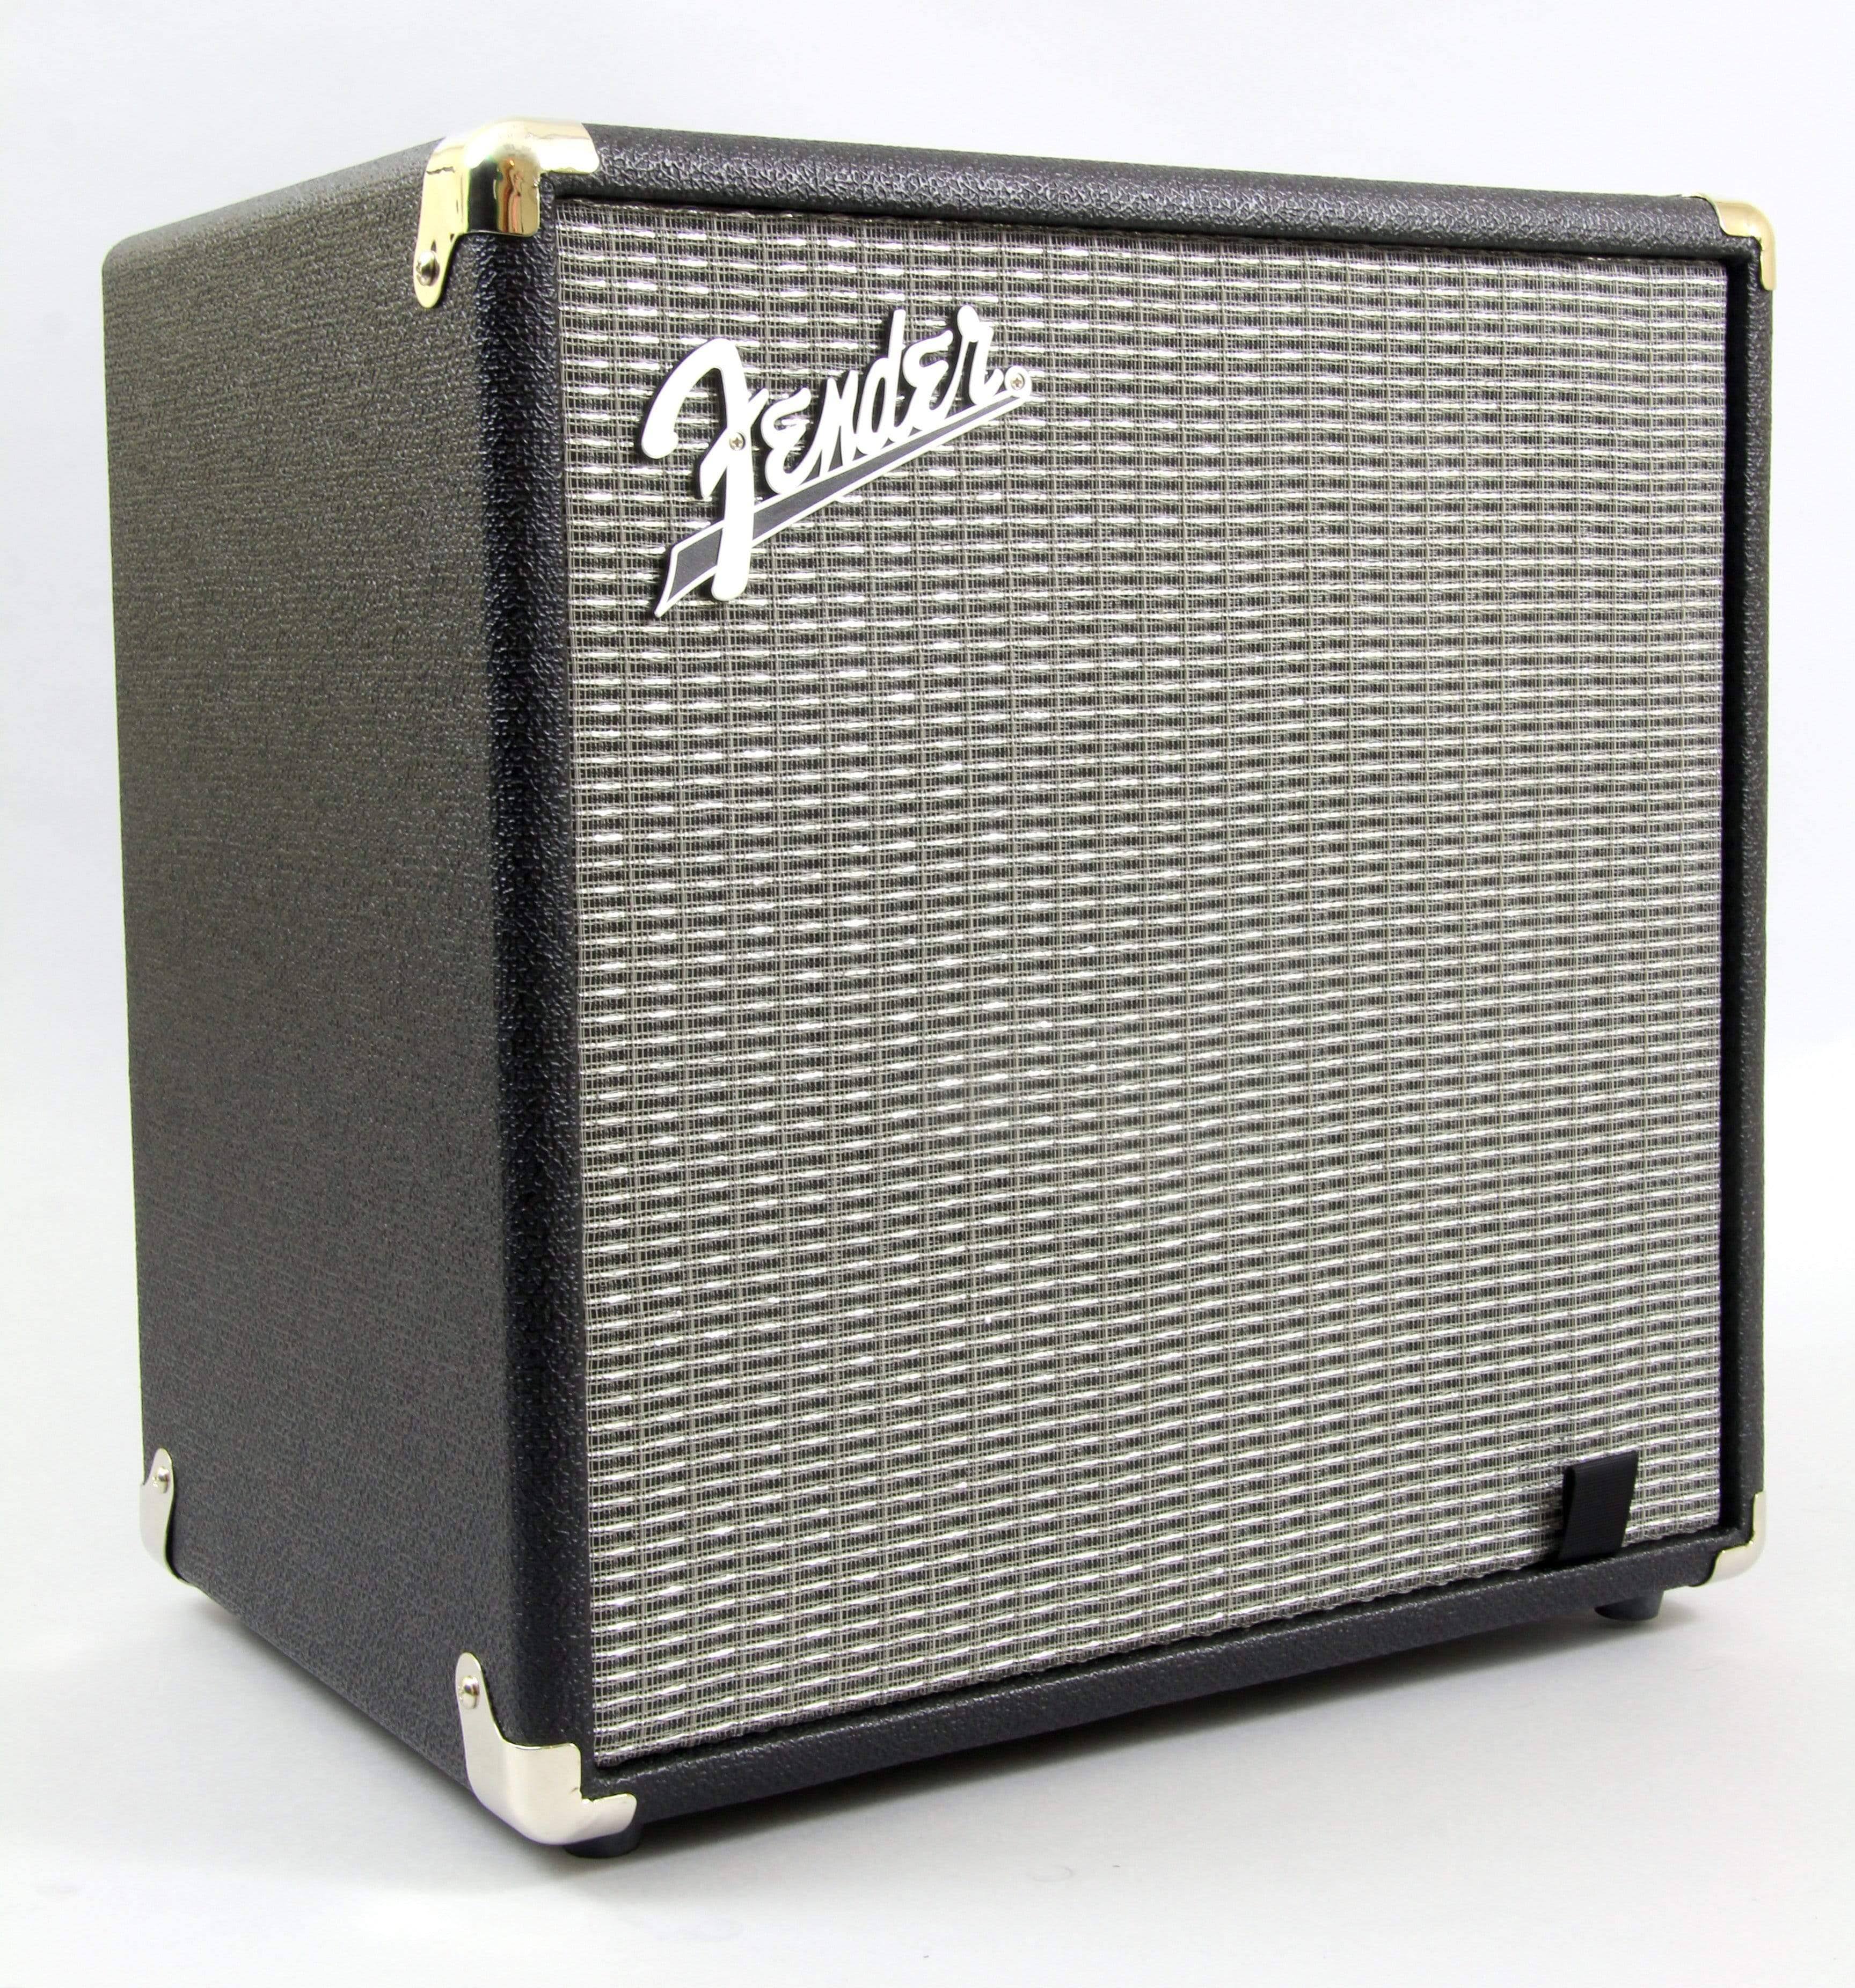 Fender Rumble Combo Bass Amplifier - Black and Silver, 120V